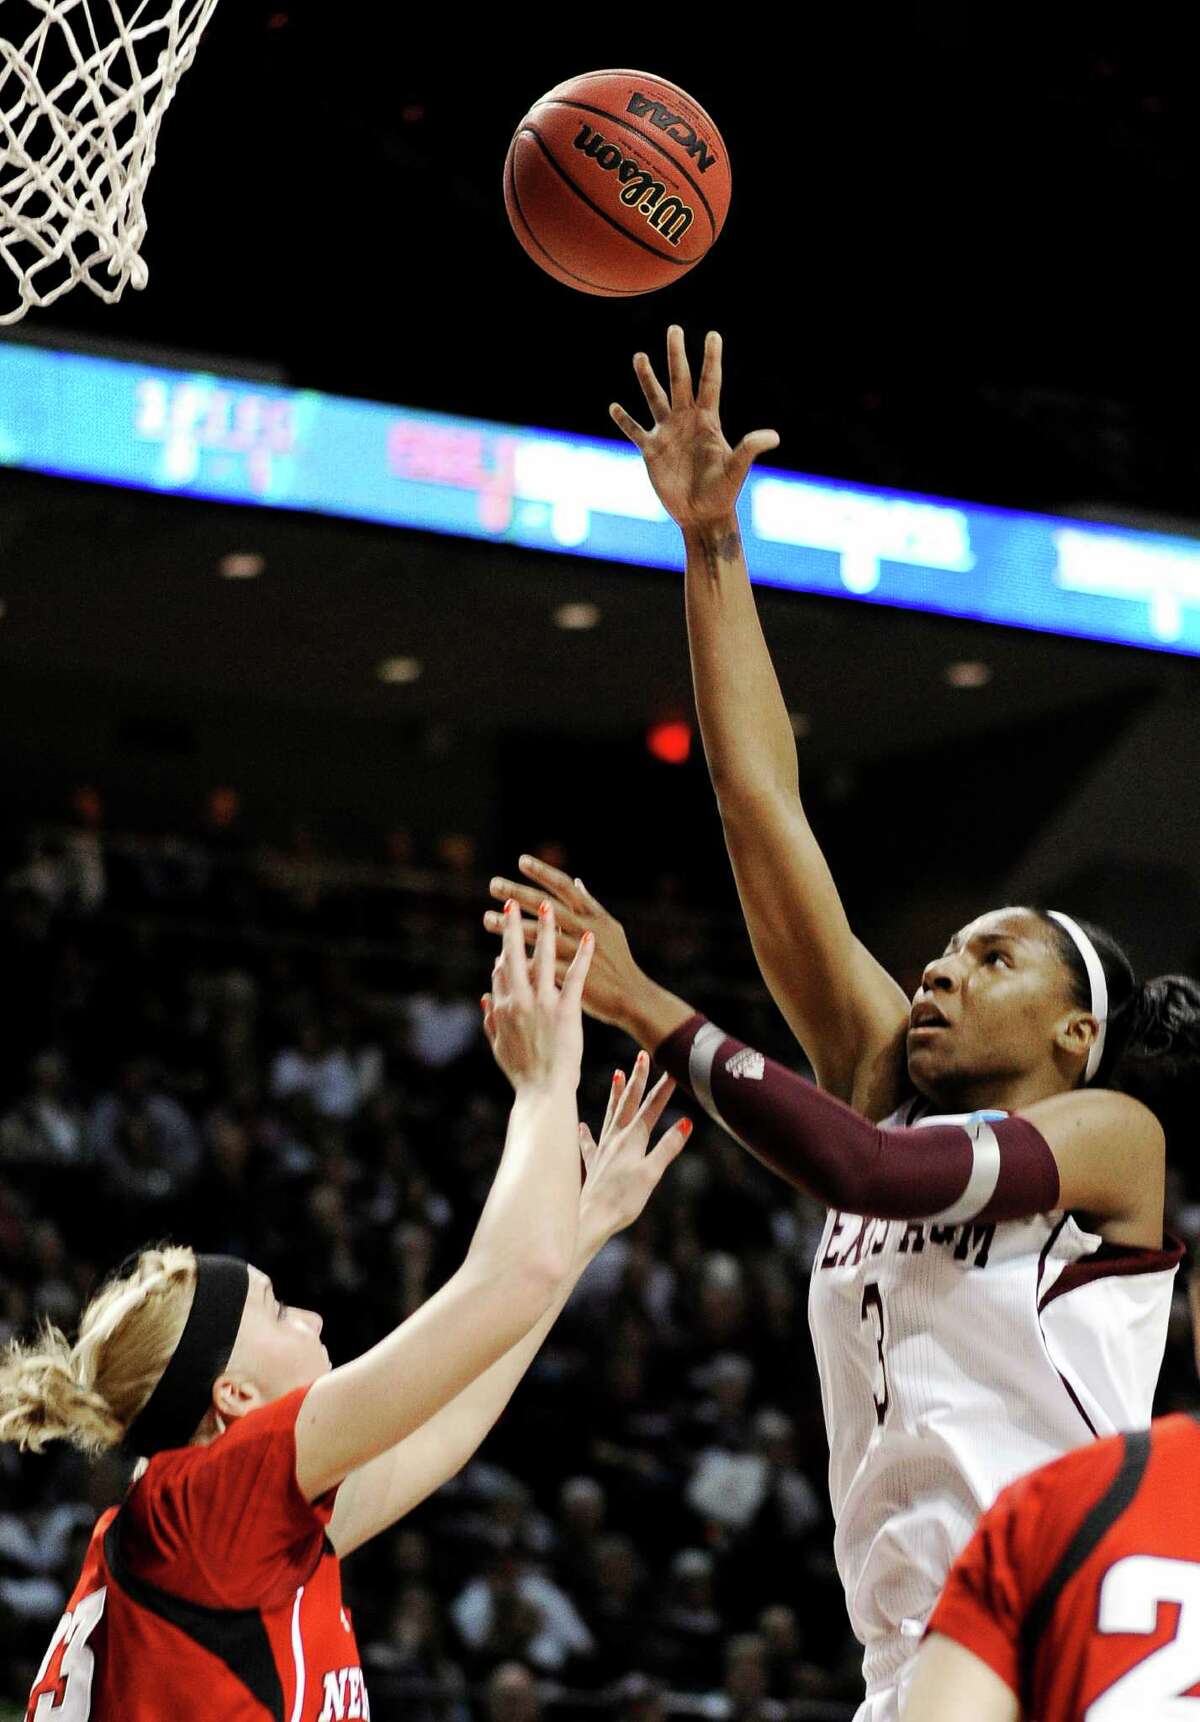 Texas A&M's Kelsey Bone (3) shoots over Nebraska's Emily Cady (23) during a second-round game in the NCAA women's college basketball tournament in College Station, Texas, Monday, March 25, 2013.